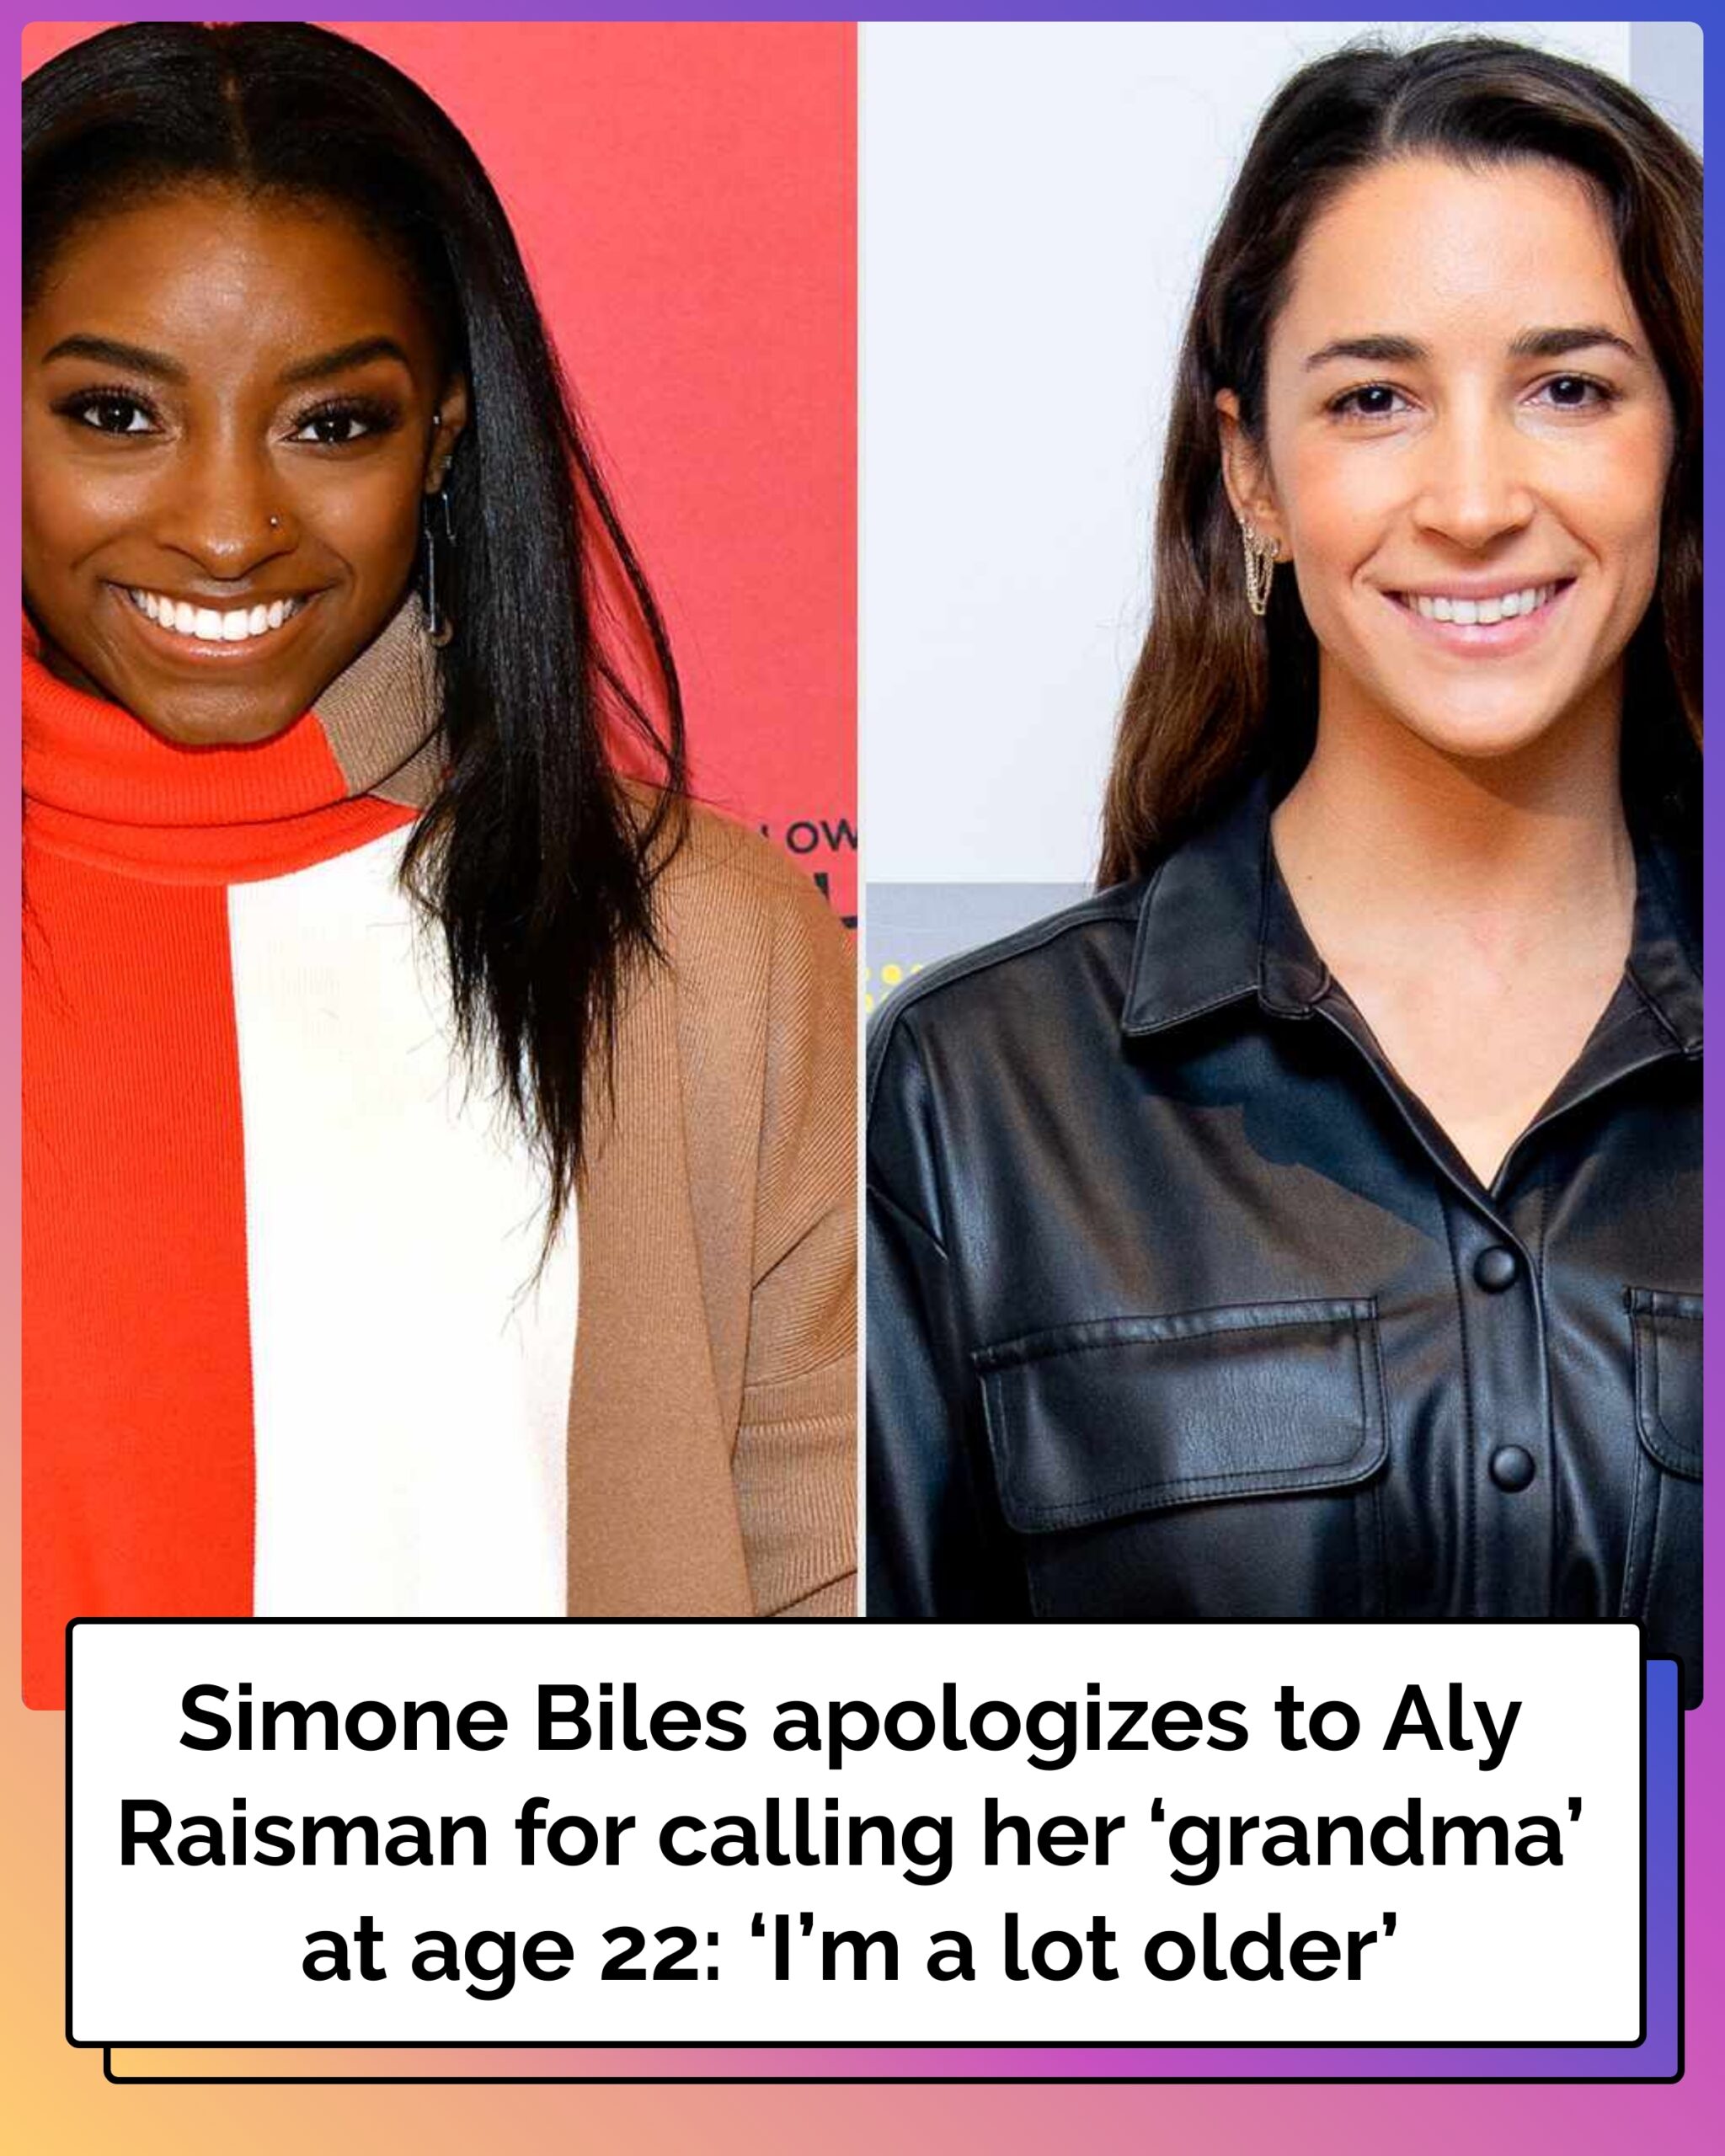 Simone Biles Apologizes to Aly Raisman for Calling Her ‘Grandma’ at Age 22: ‘I’m a Lot Older’